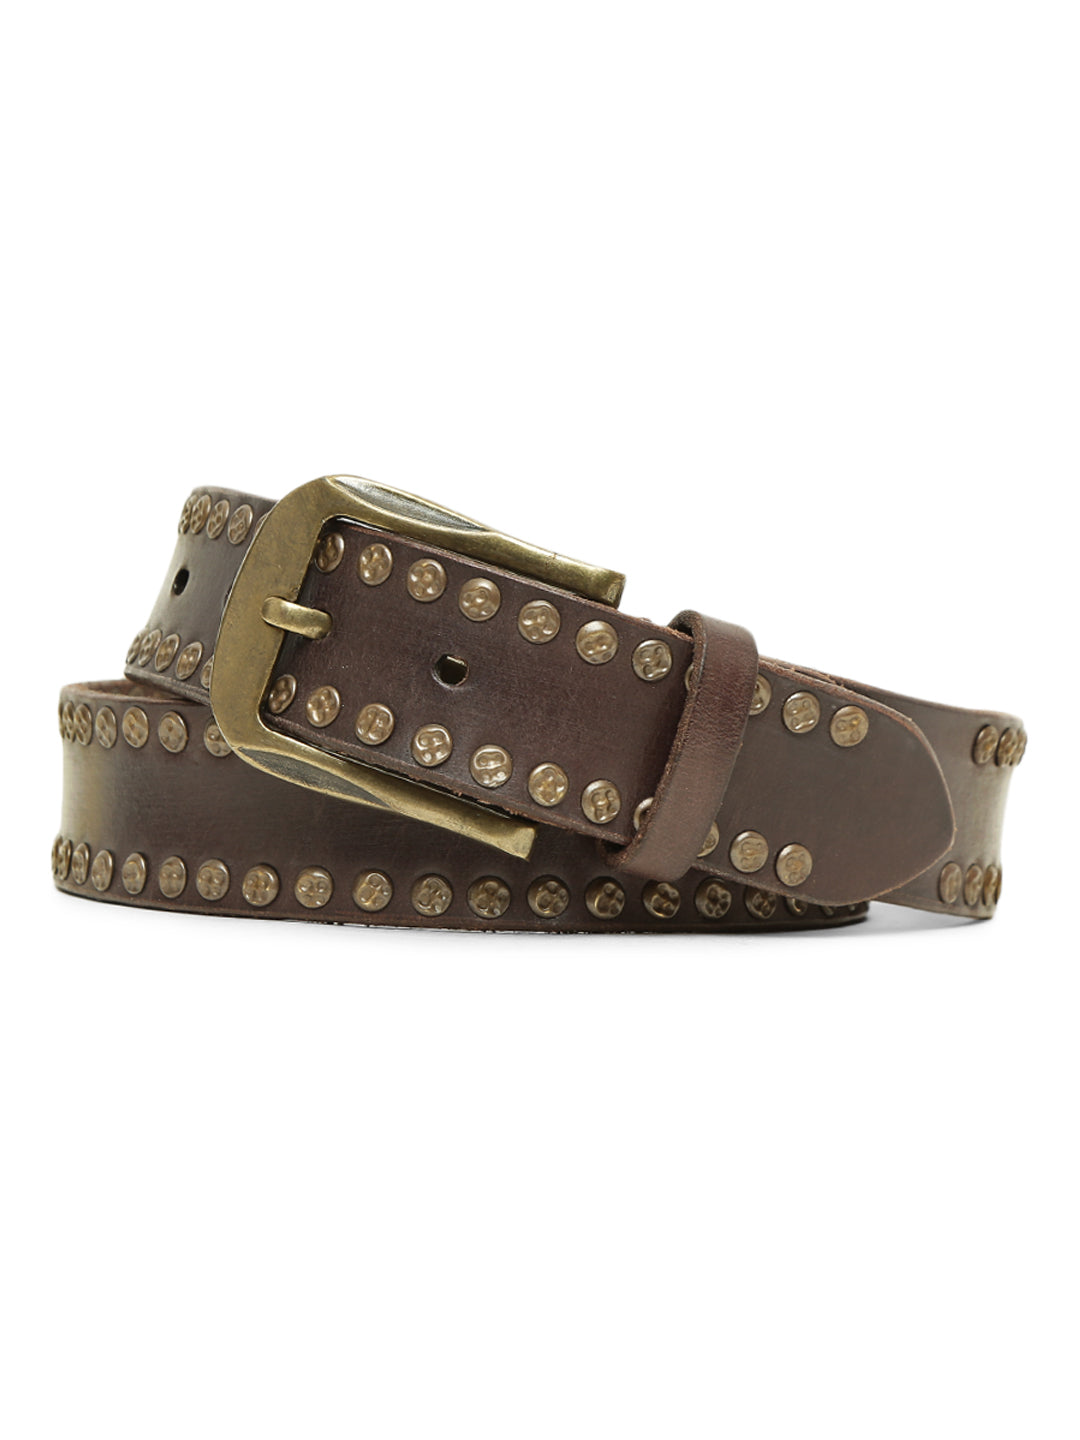 Brown Genuine Leather With Studded Mens Belt